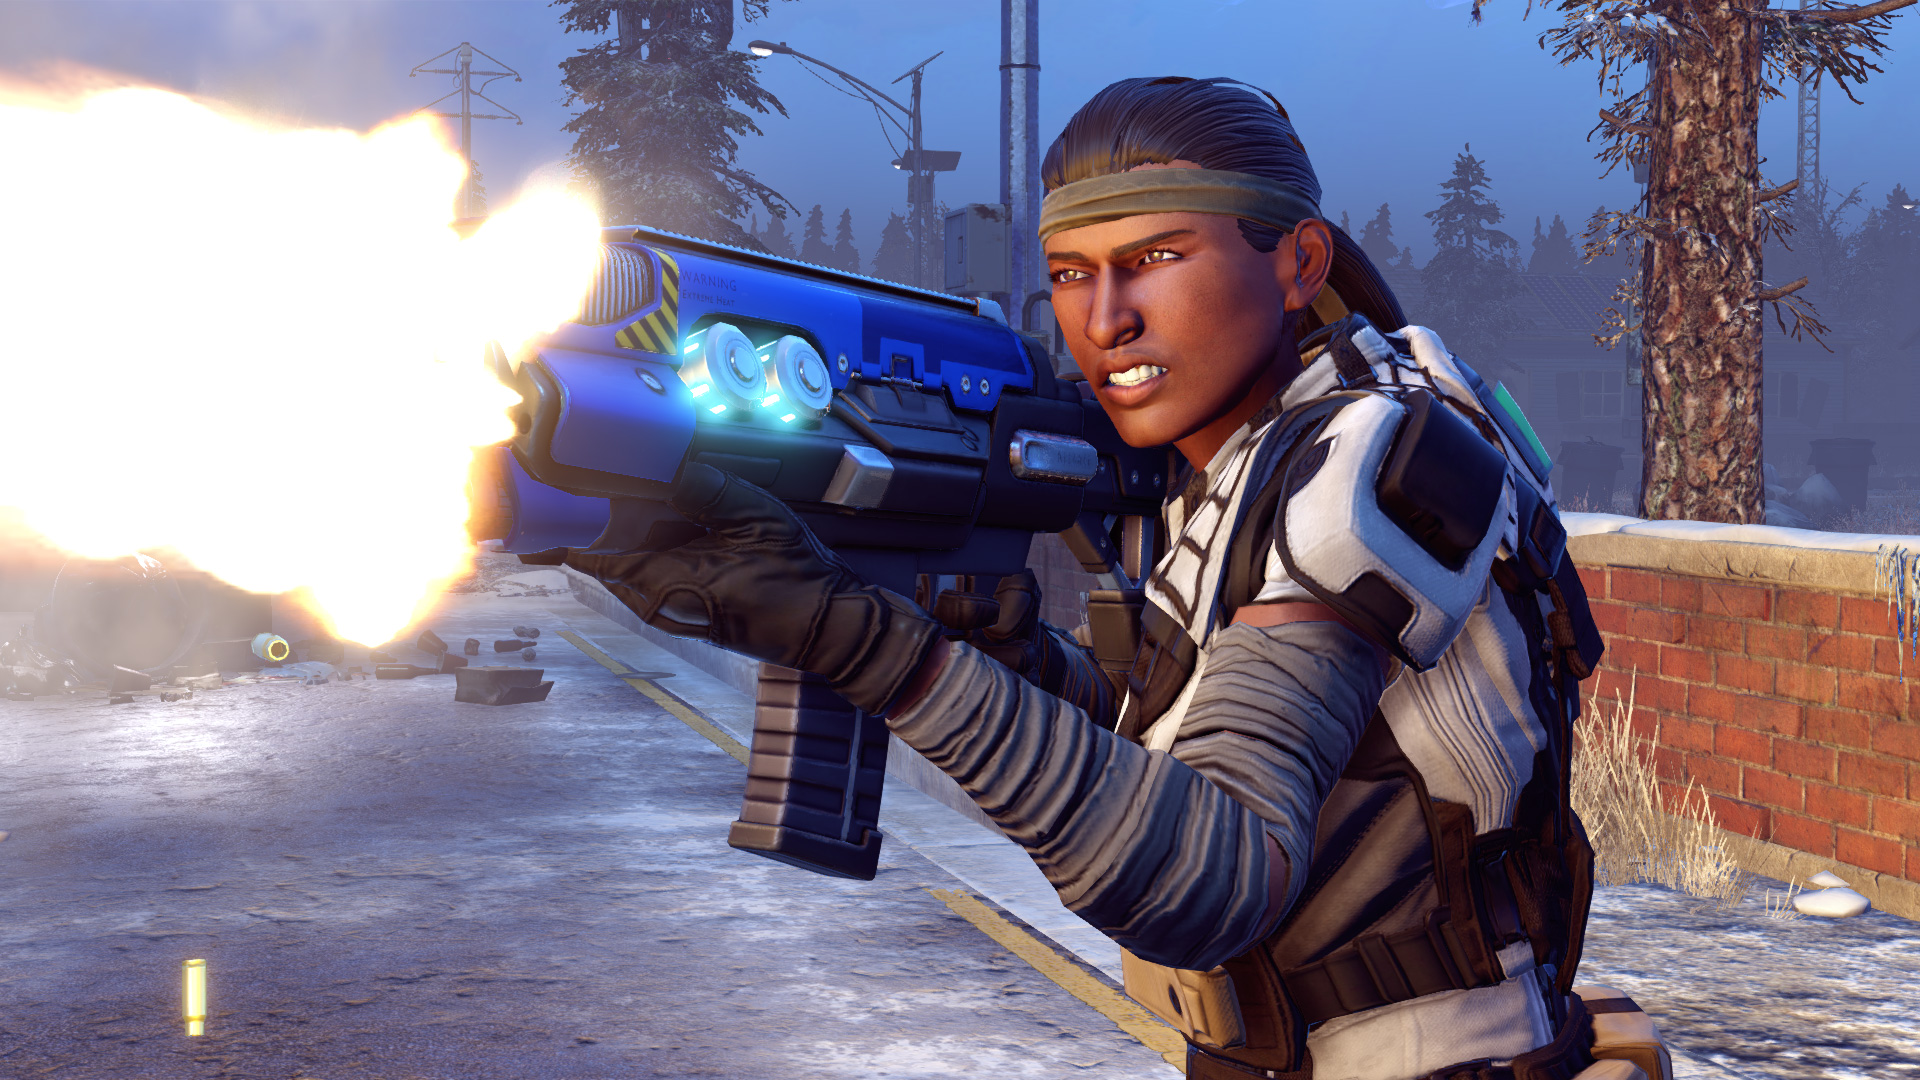 XCOM 2 is free on the Epic Games Store, but the deal ends next week